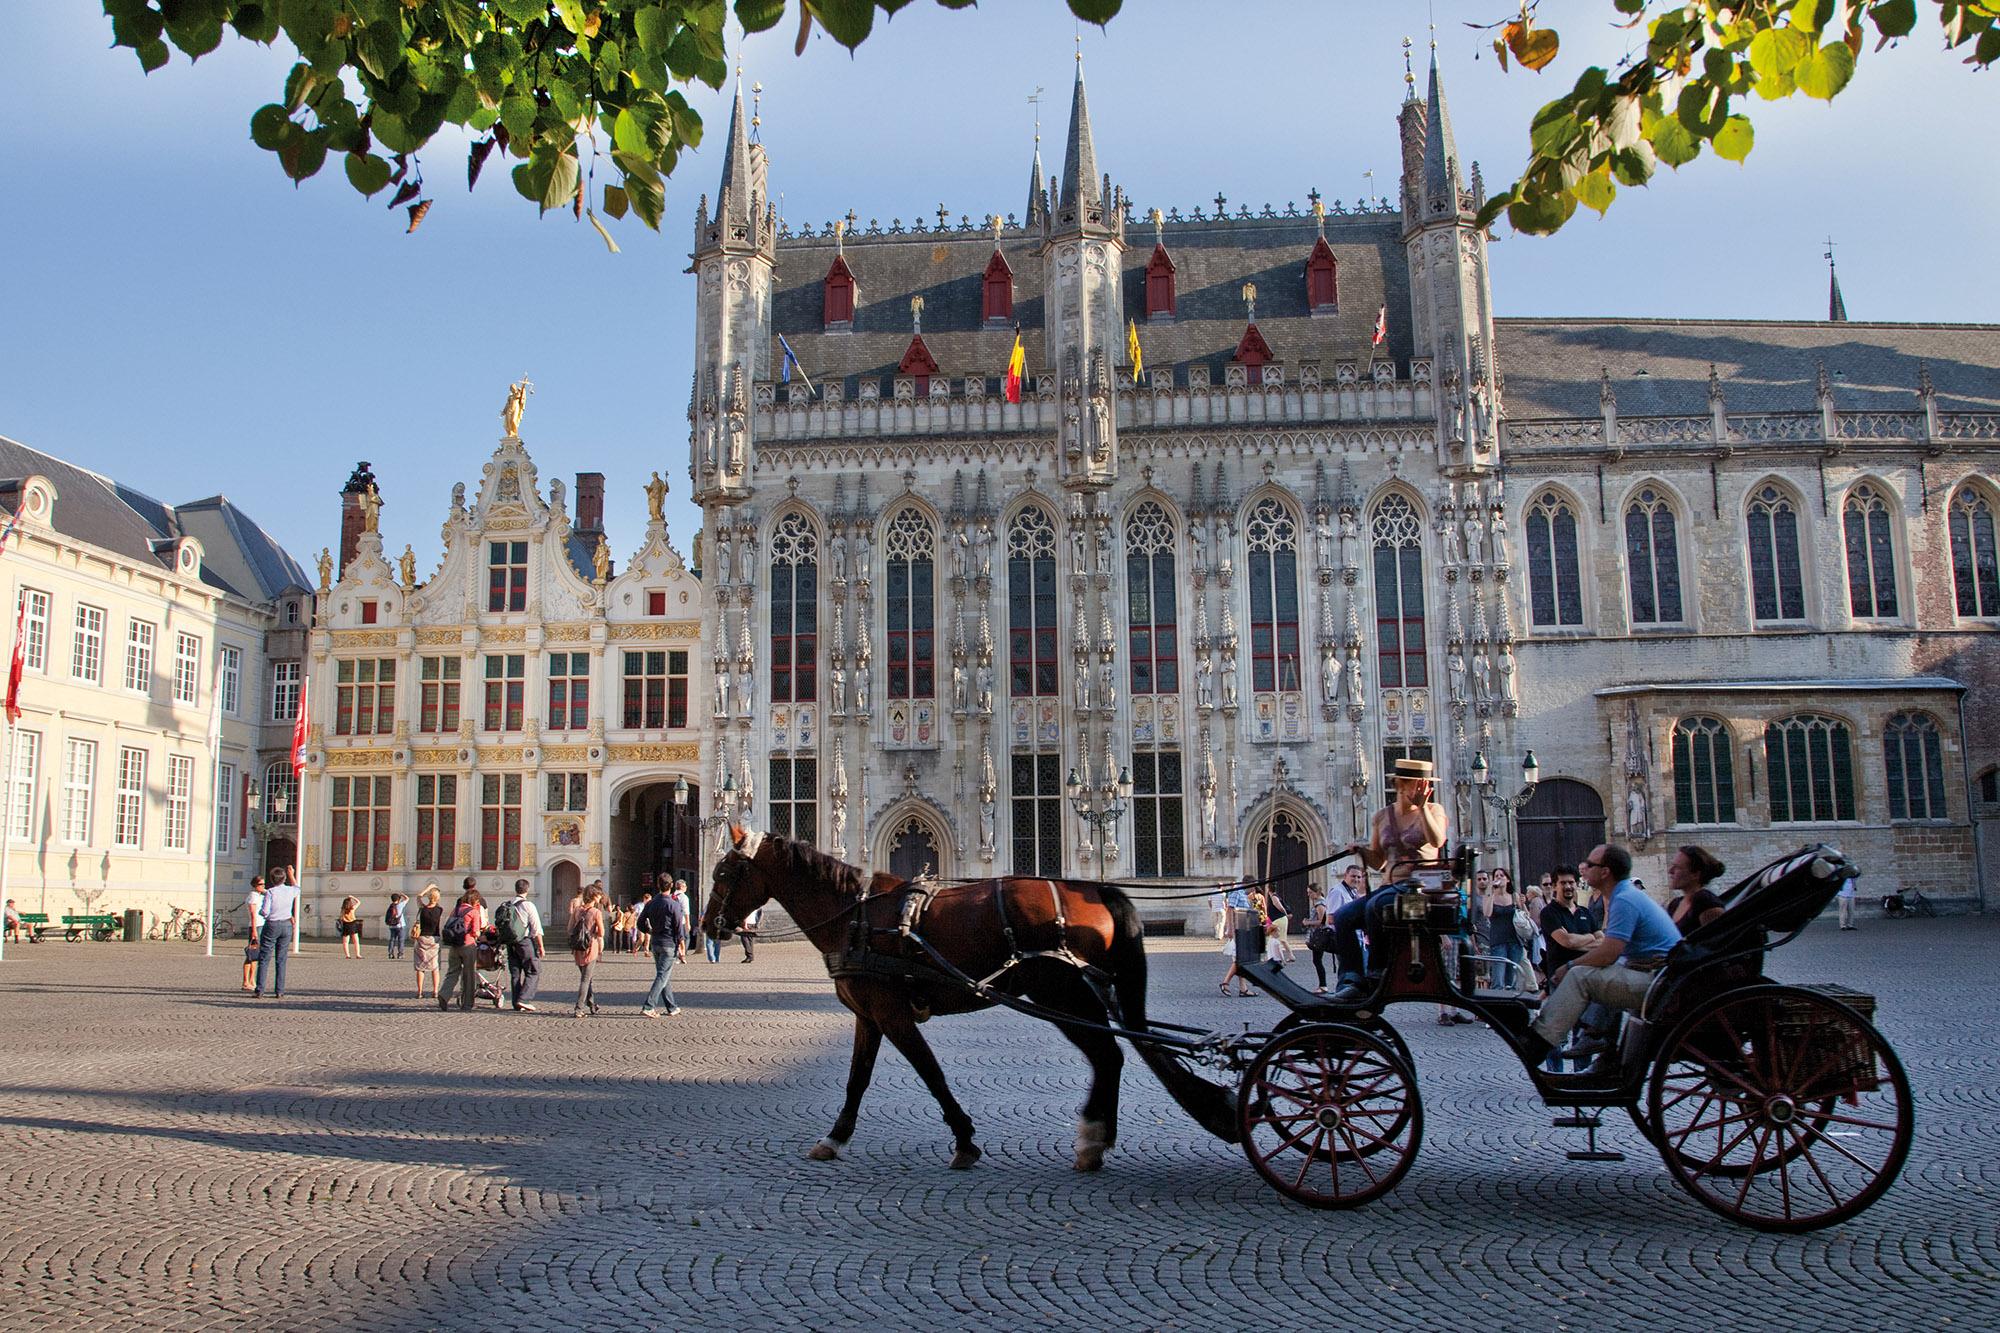 The Burg Square with the 14th-century city hall, the old Court of Justice, and the Basilica of the Holy Blood. - © Jan D. Hondt / VisitBruges